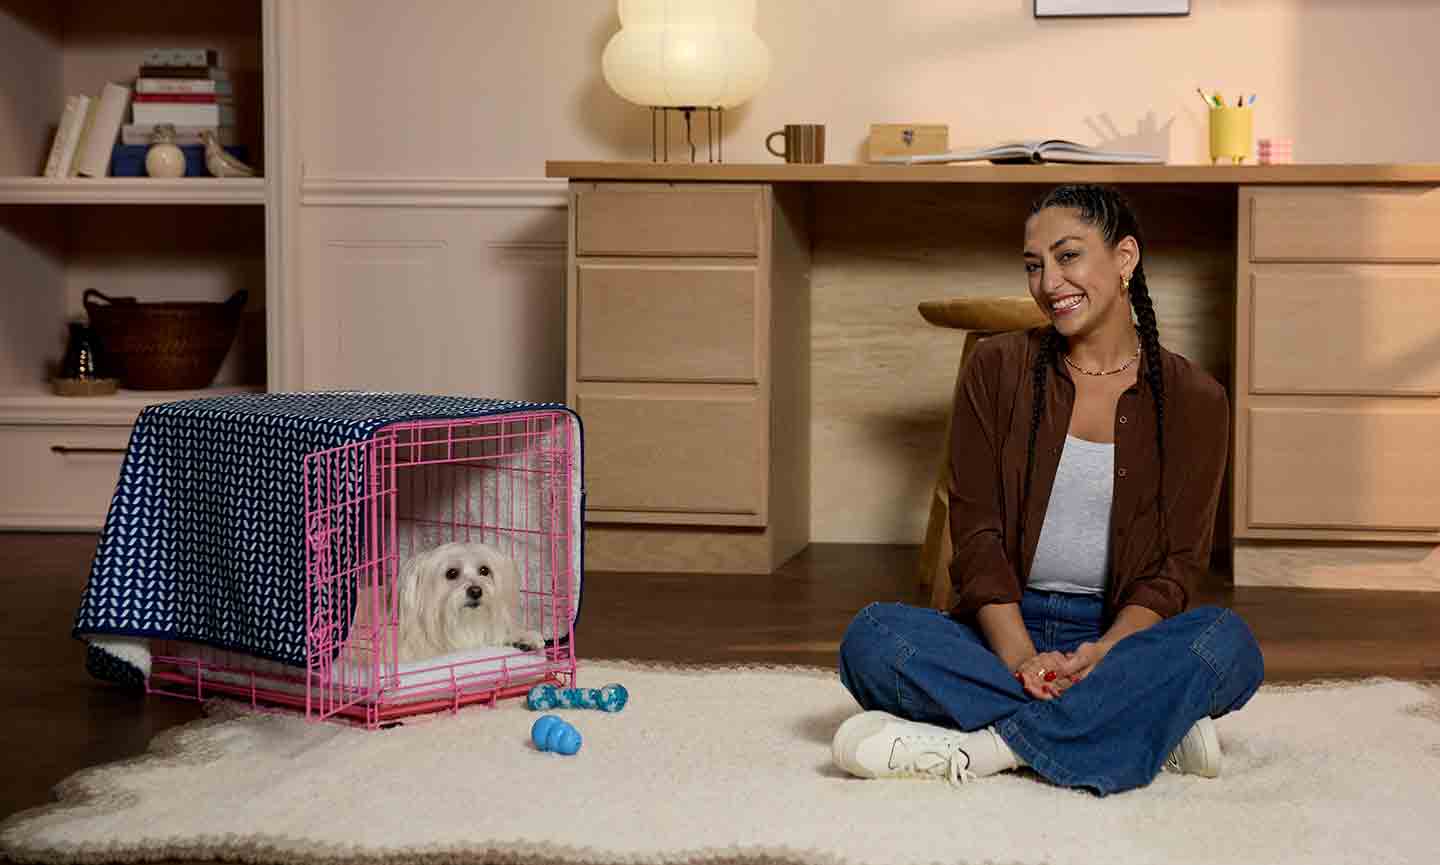 What to Look For When Choosing a Dog Crate – American Kennel Club